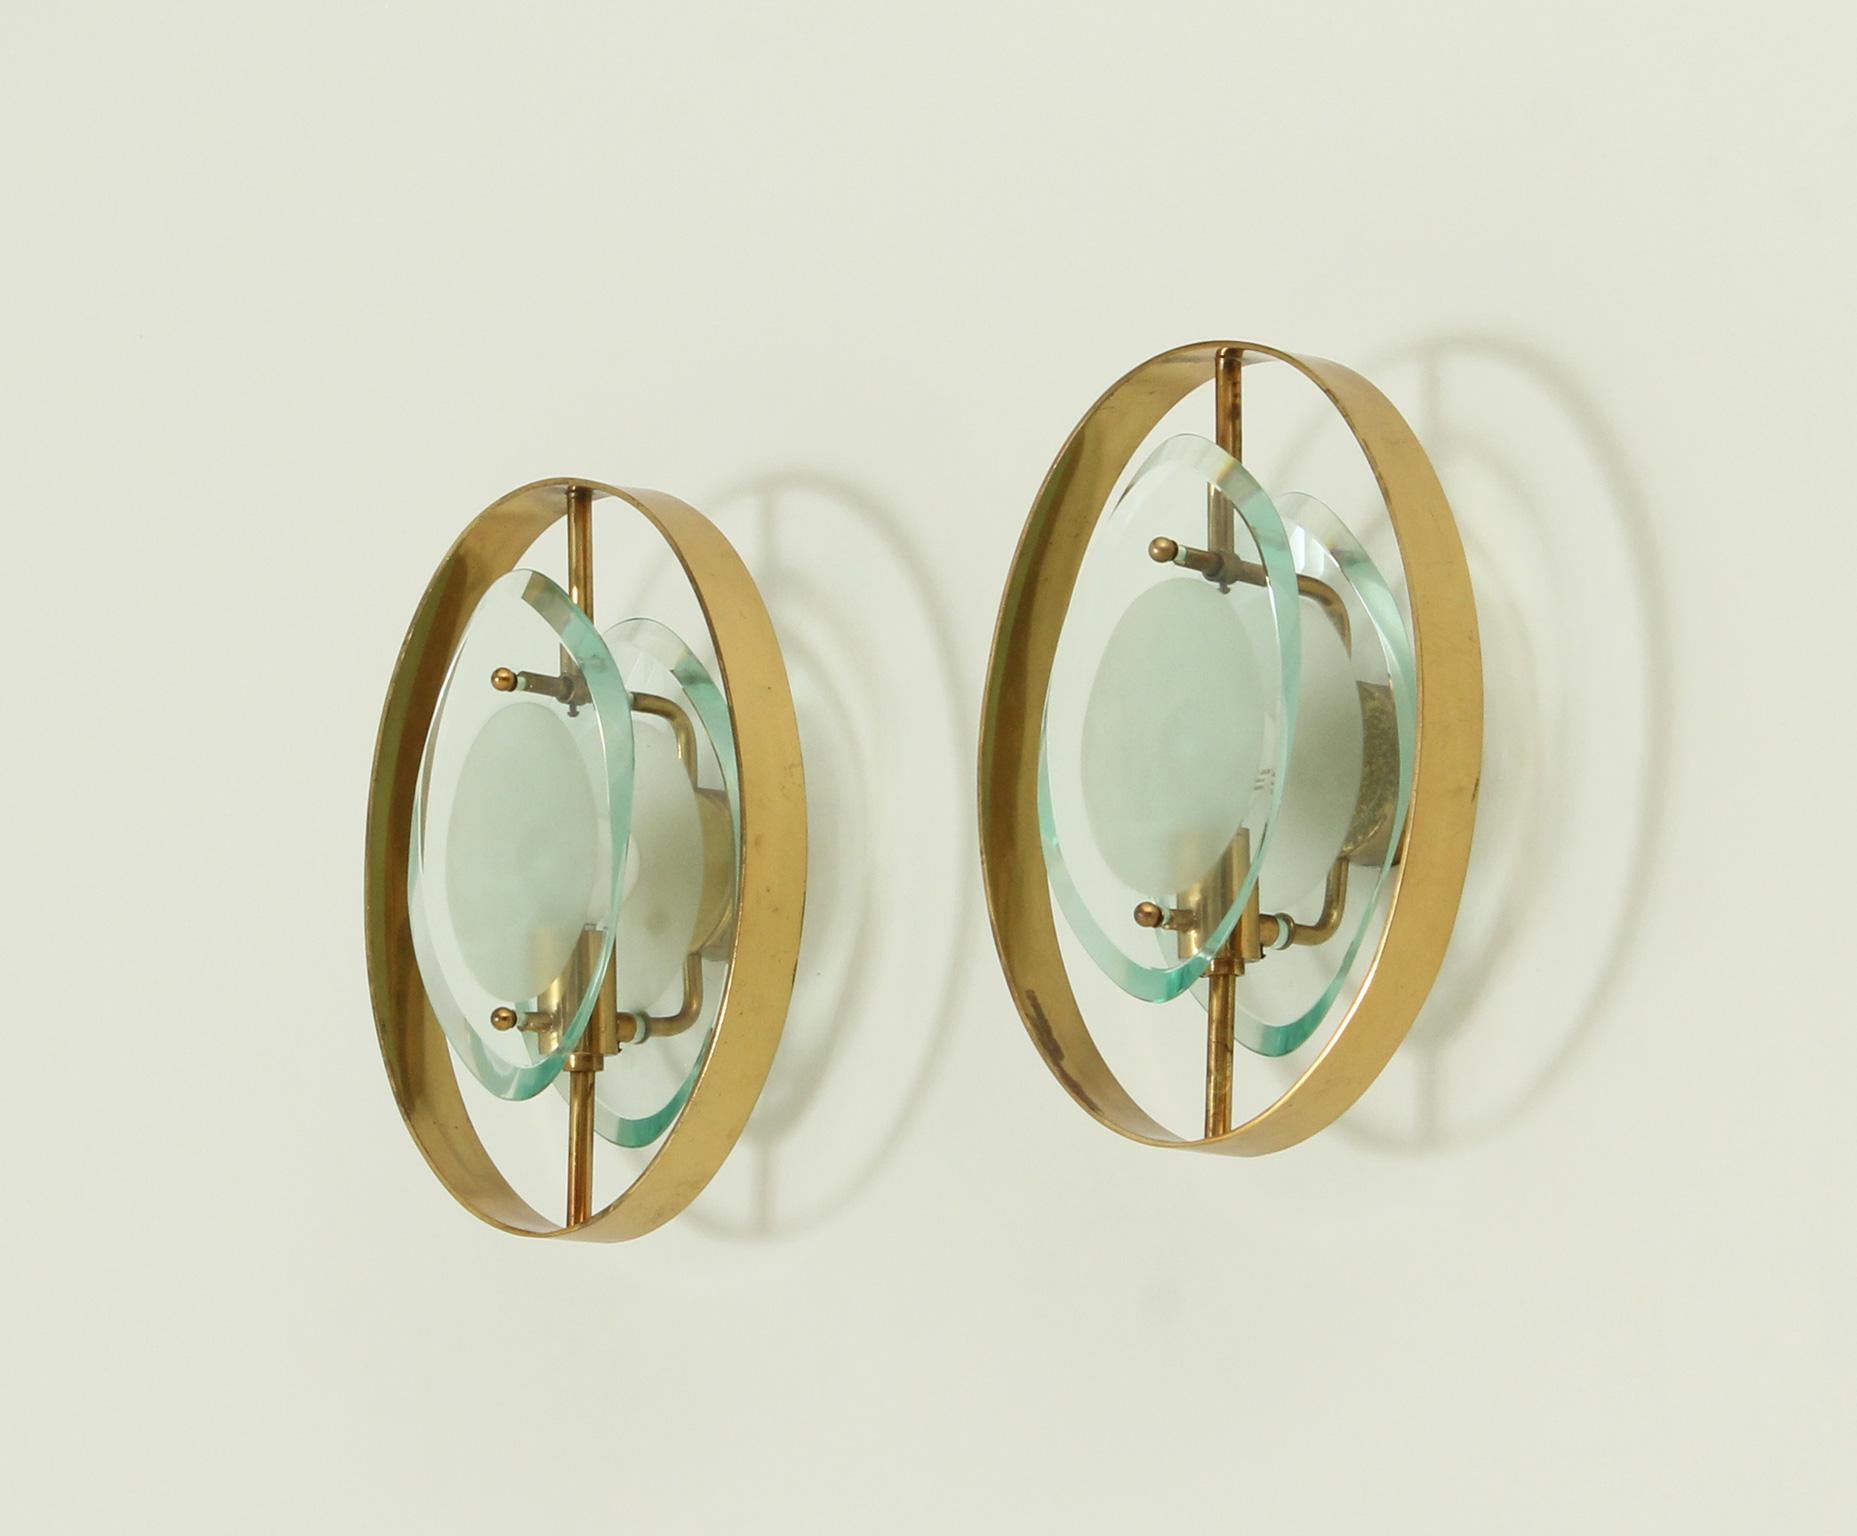 Pair of sconces model 2240 designed in 1961 by Max Ingrand for Fontana Arte, Italy. Double grind-molded glass with opaque excavation in matt glass and brass frame.